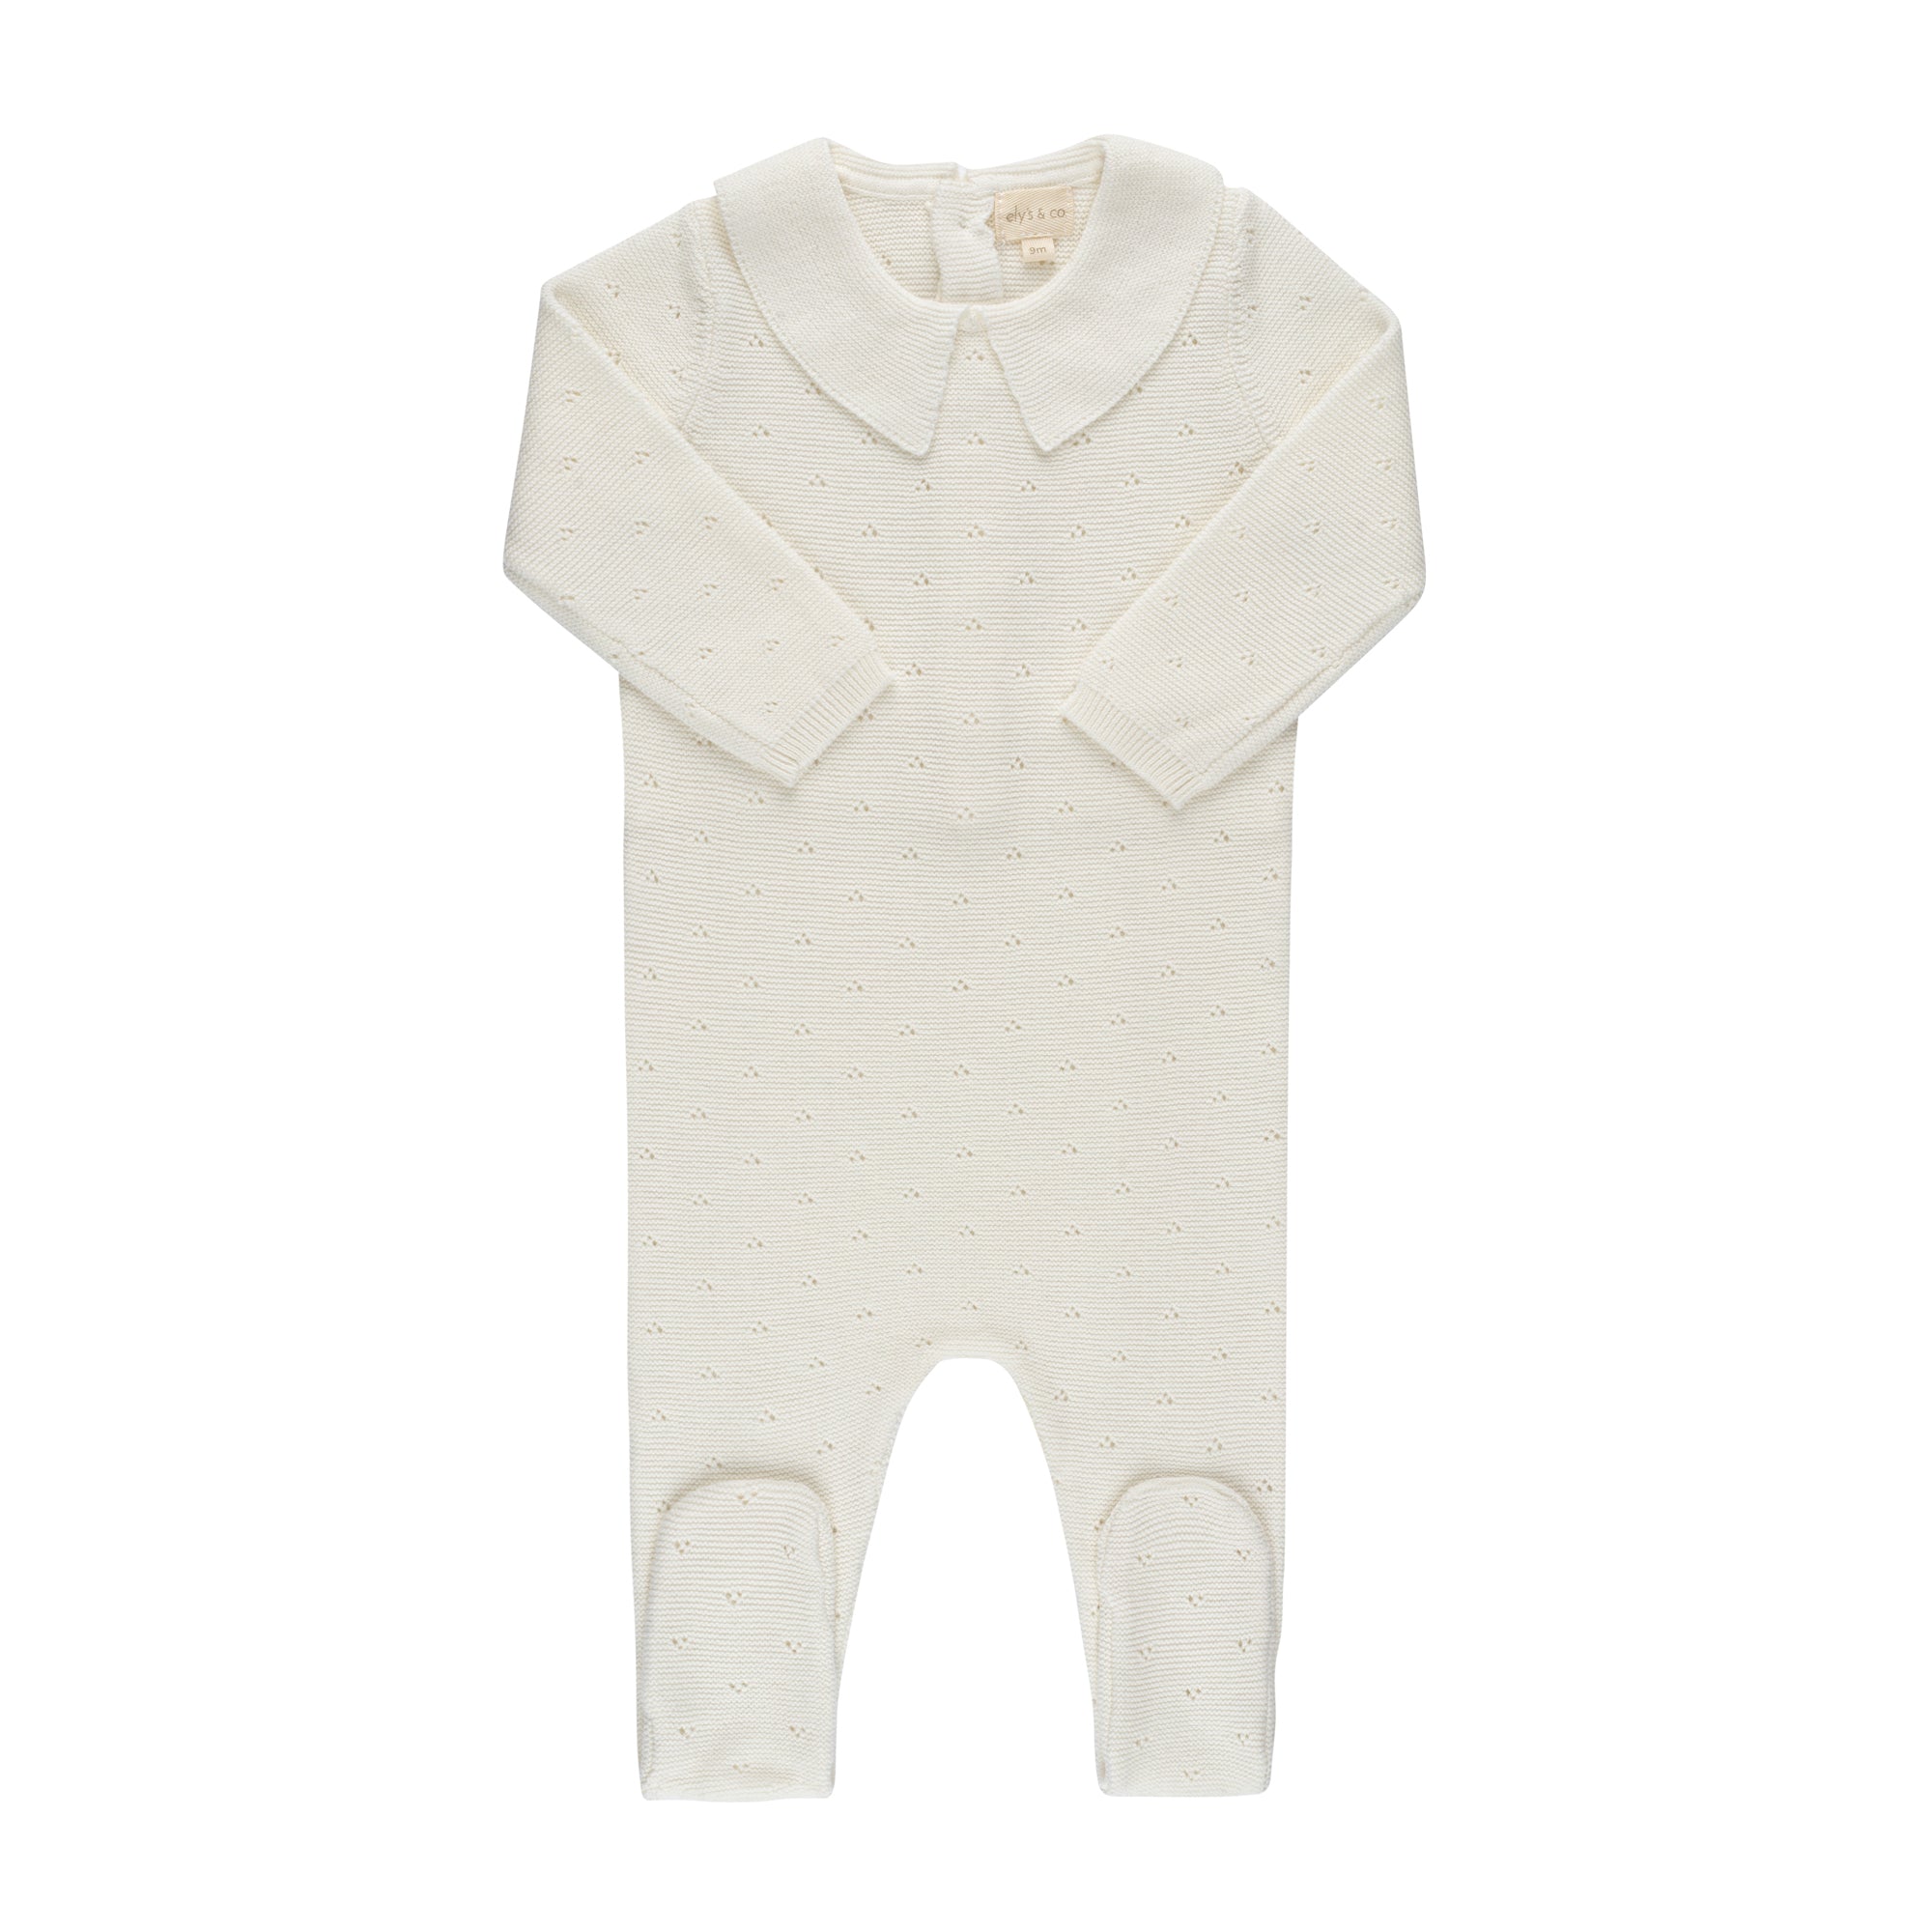 Pointelle Knit Collection - Footies